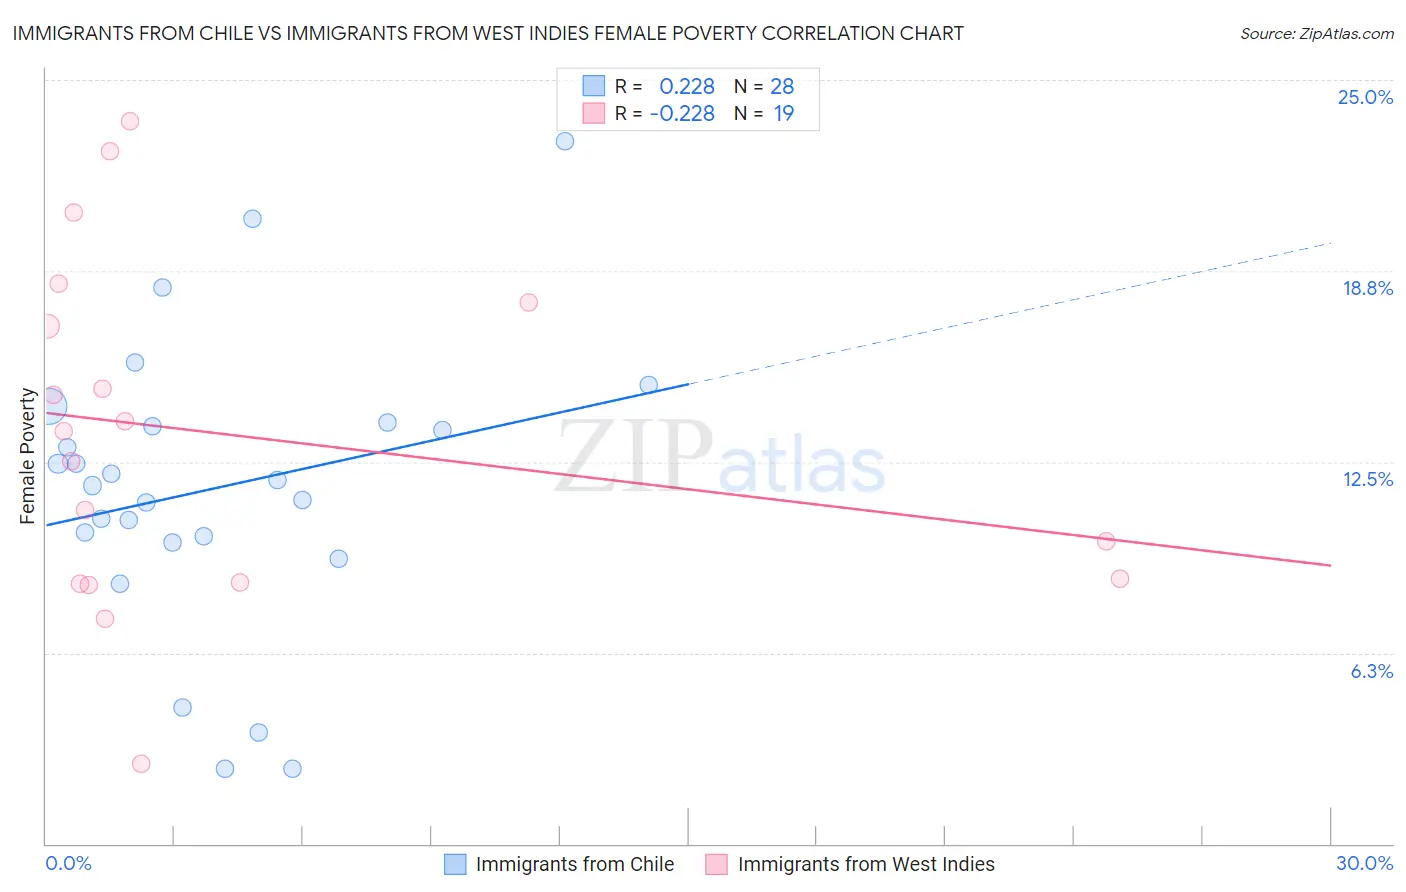 Immigrants from Chile vs Immigrants from West Indies Female Poverty